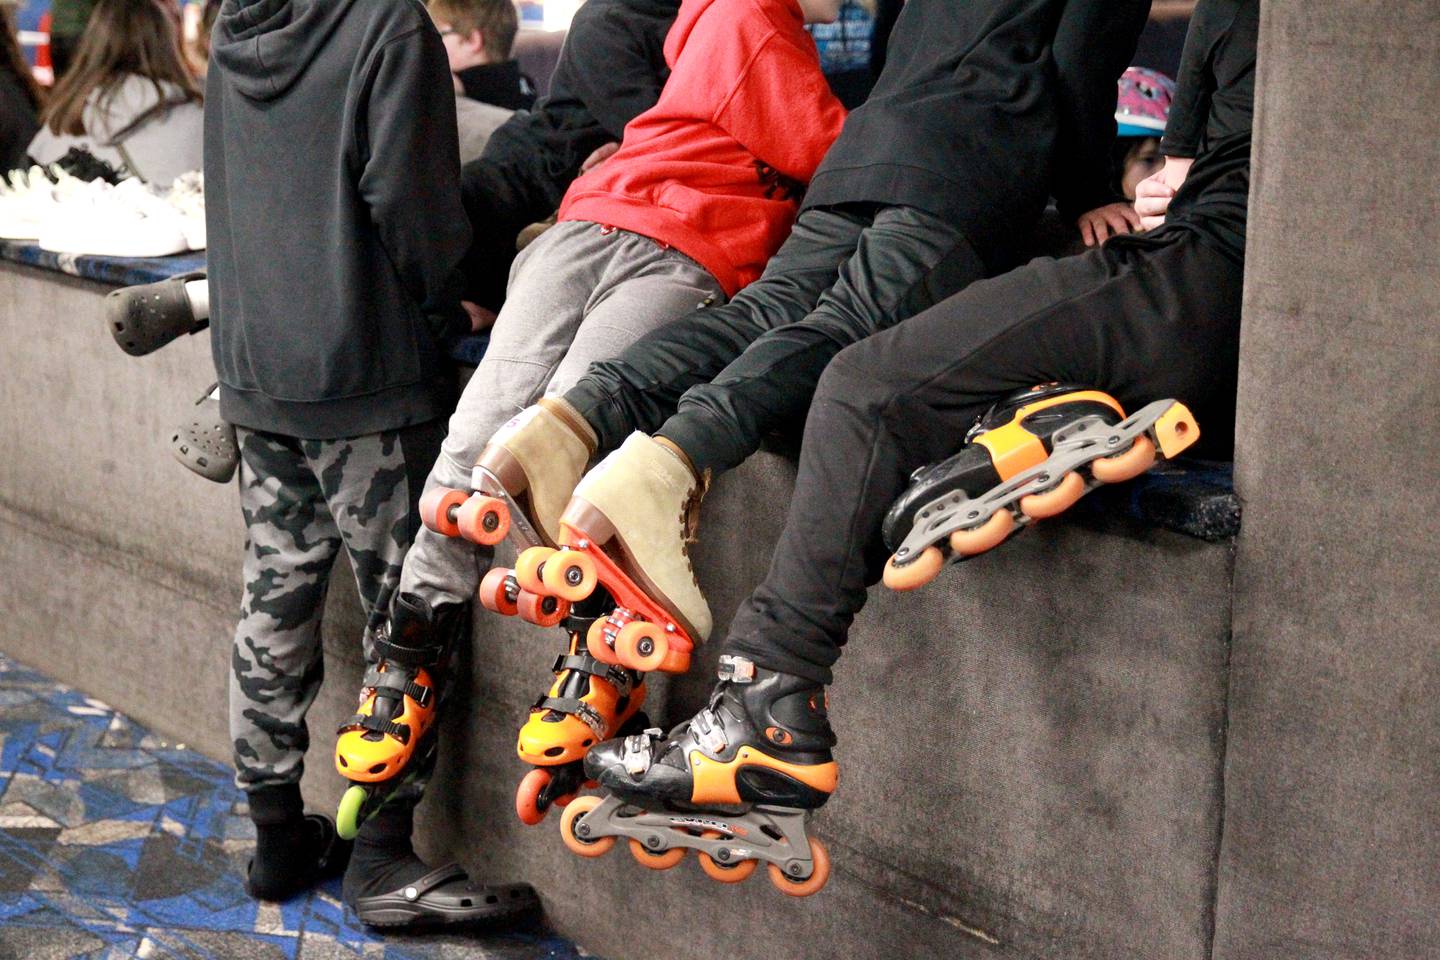 Kids hang out on a bench during a winter break open skate session at Funway in Batavia.